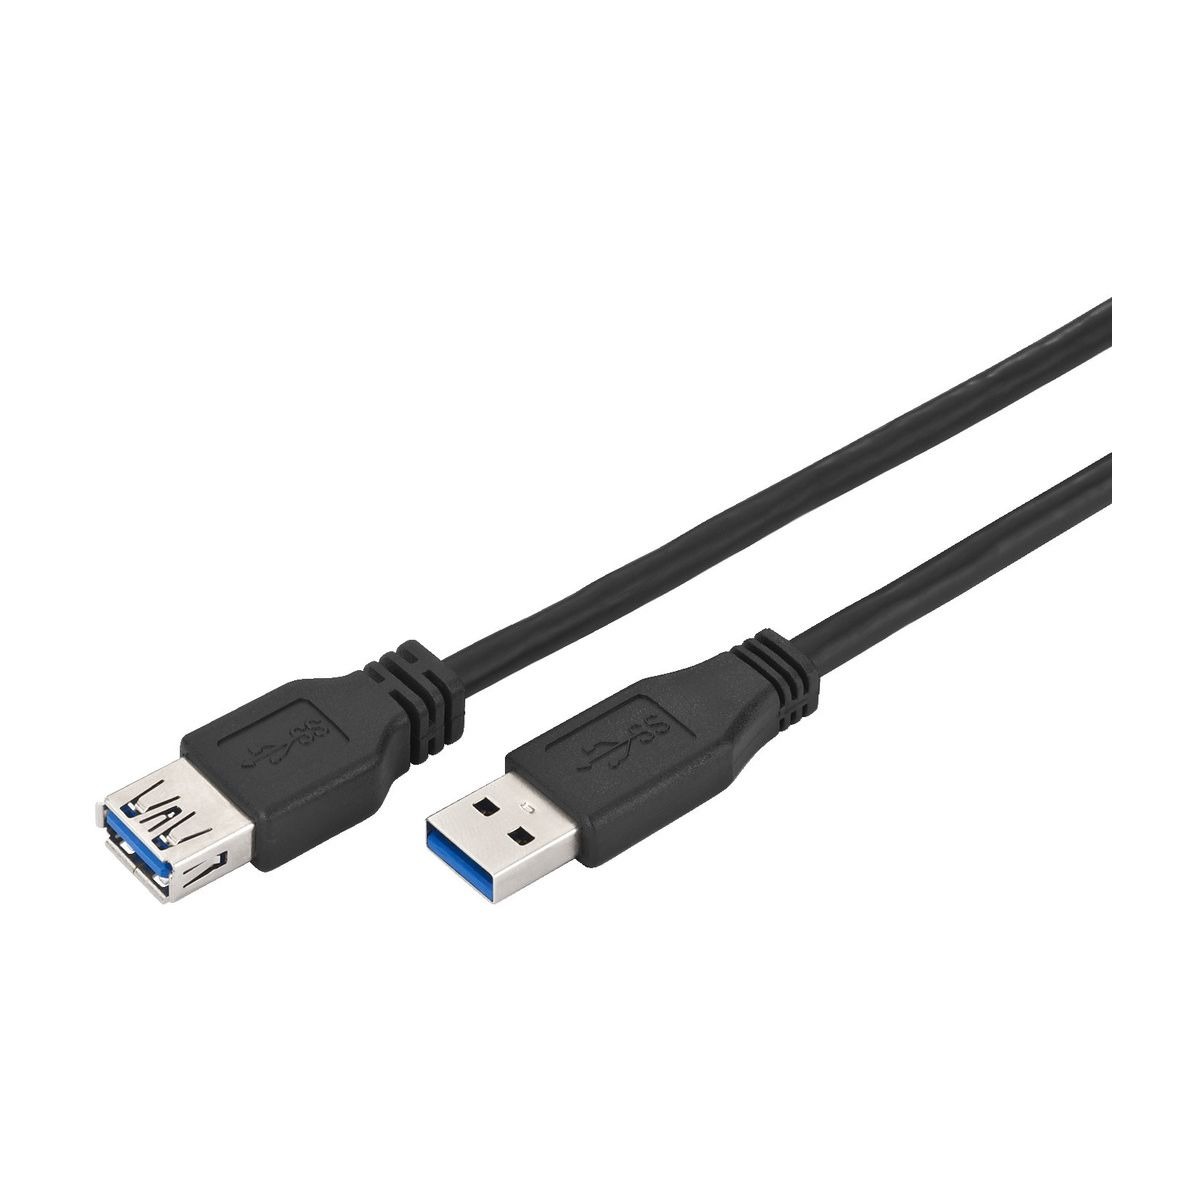 USBV-302AA | USB 3.0 extension cable, 1.8 m-0